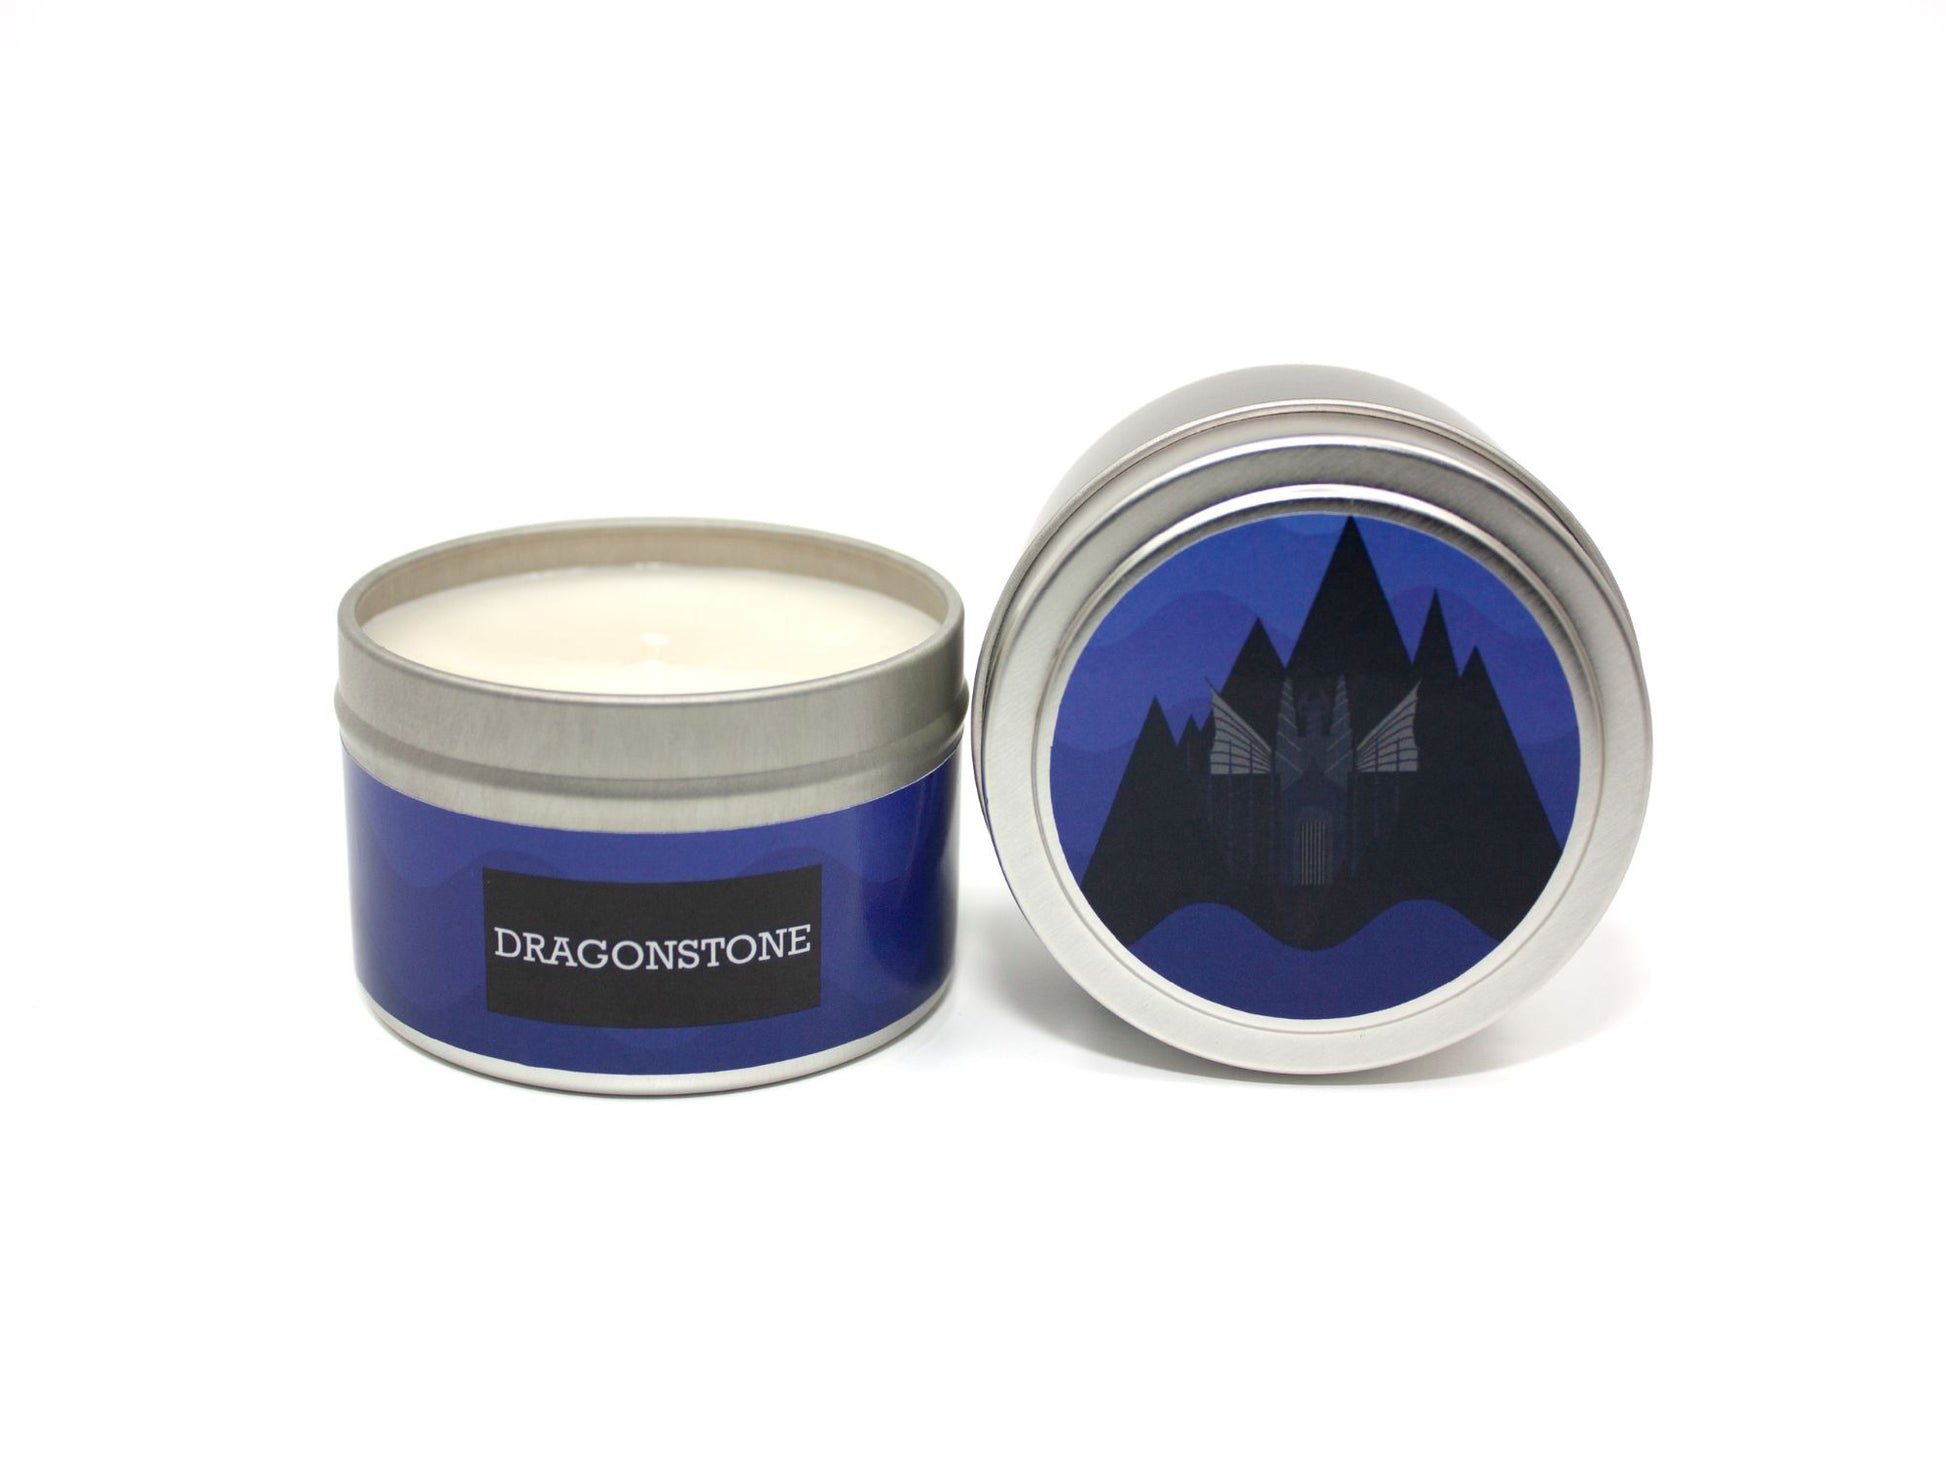 Onset & Rime chilly island scented candle called "Dragonstone" in a 4 oz silver tin. The circular label on top has blue waves in the background with a volcanic island and castle. The text on the front label is "Dragonstone - Patchouli, Vetiver, Crashing Waves, Salty Air".